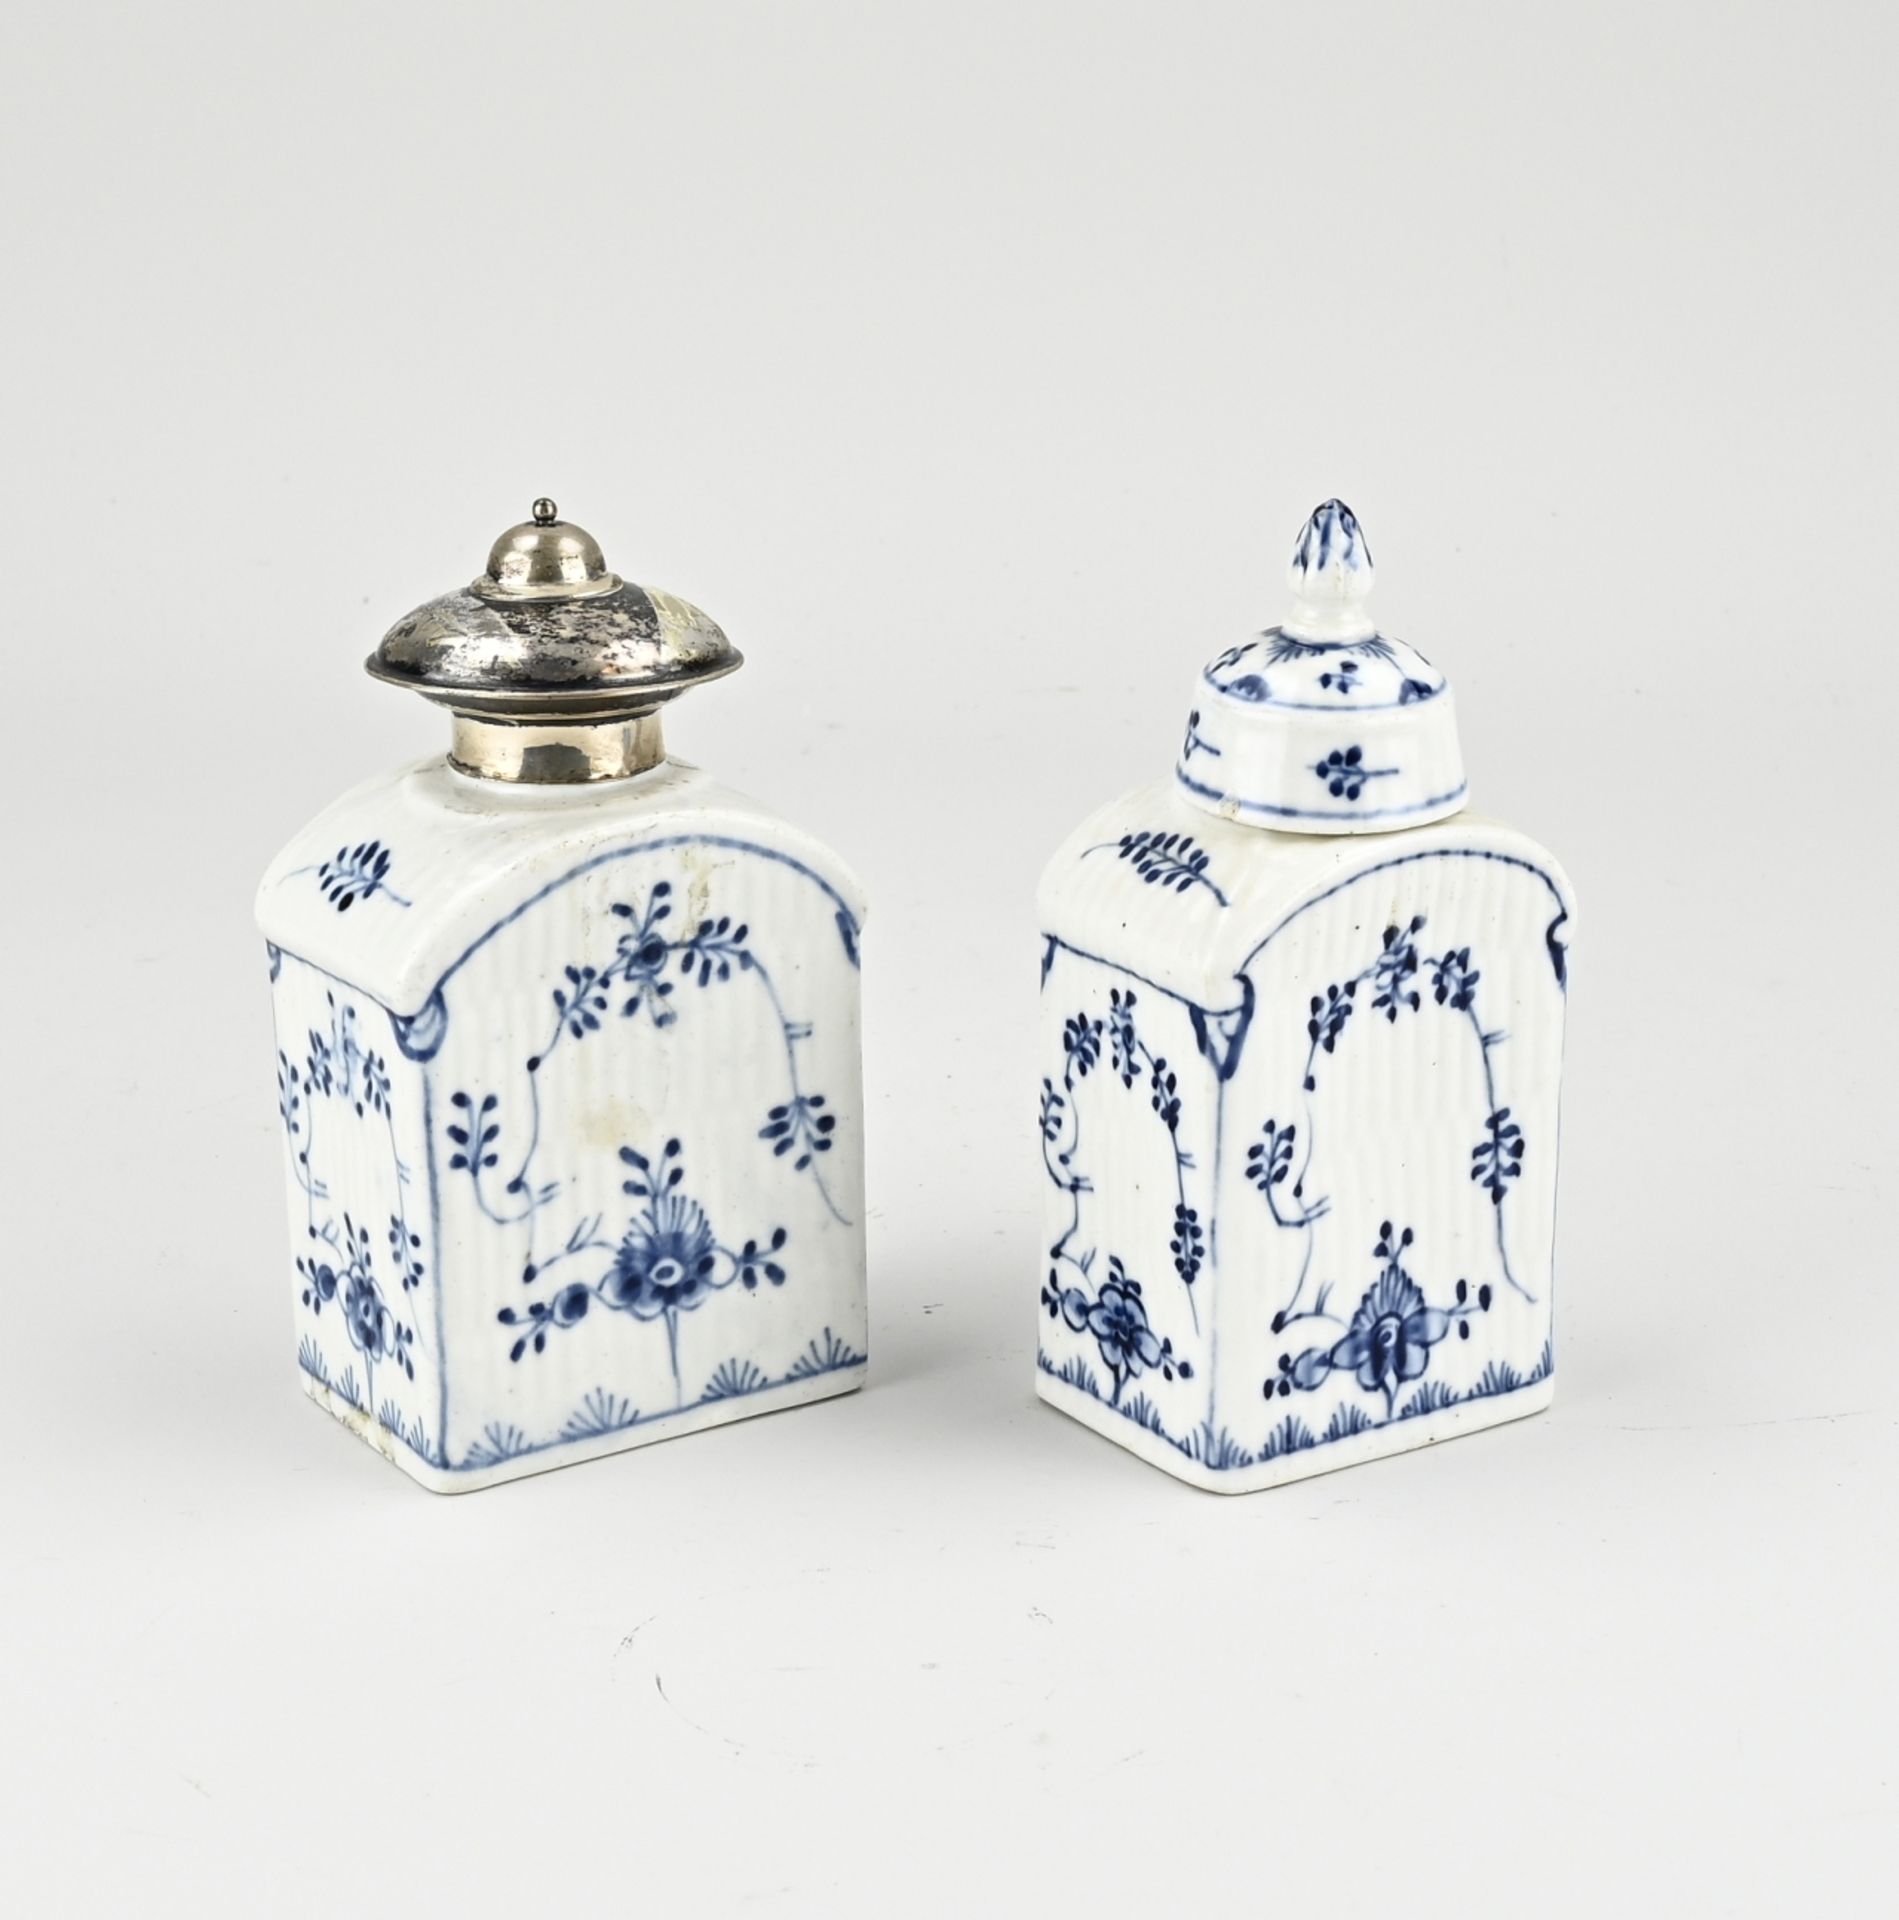 Two German tea canisters, H 14 - 15 cm.